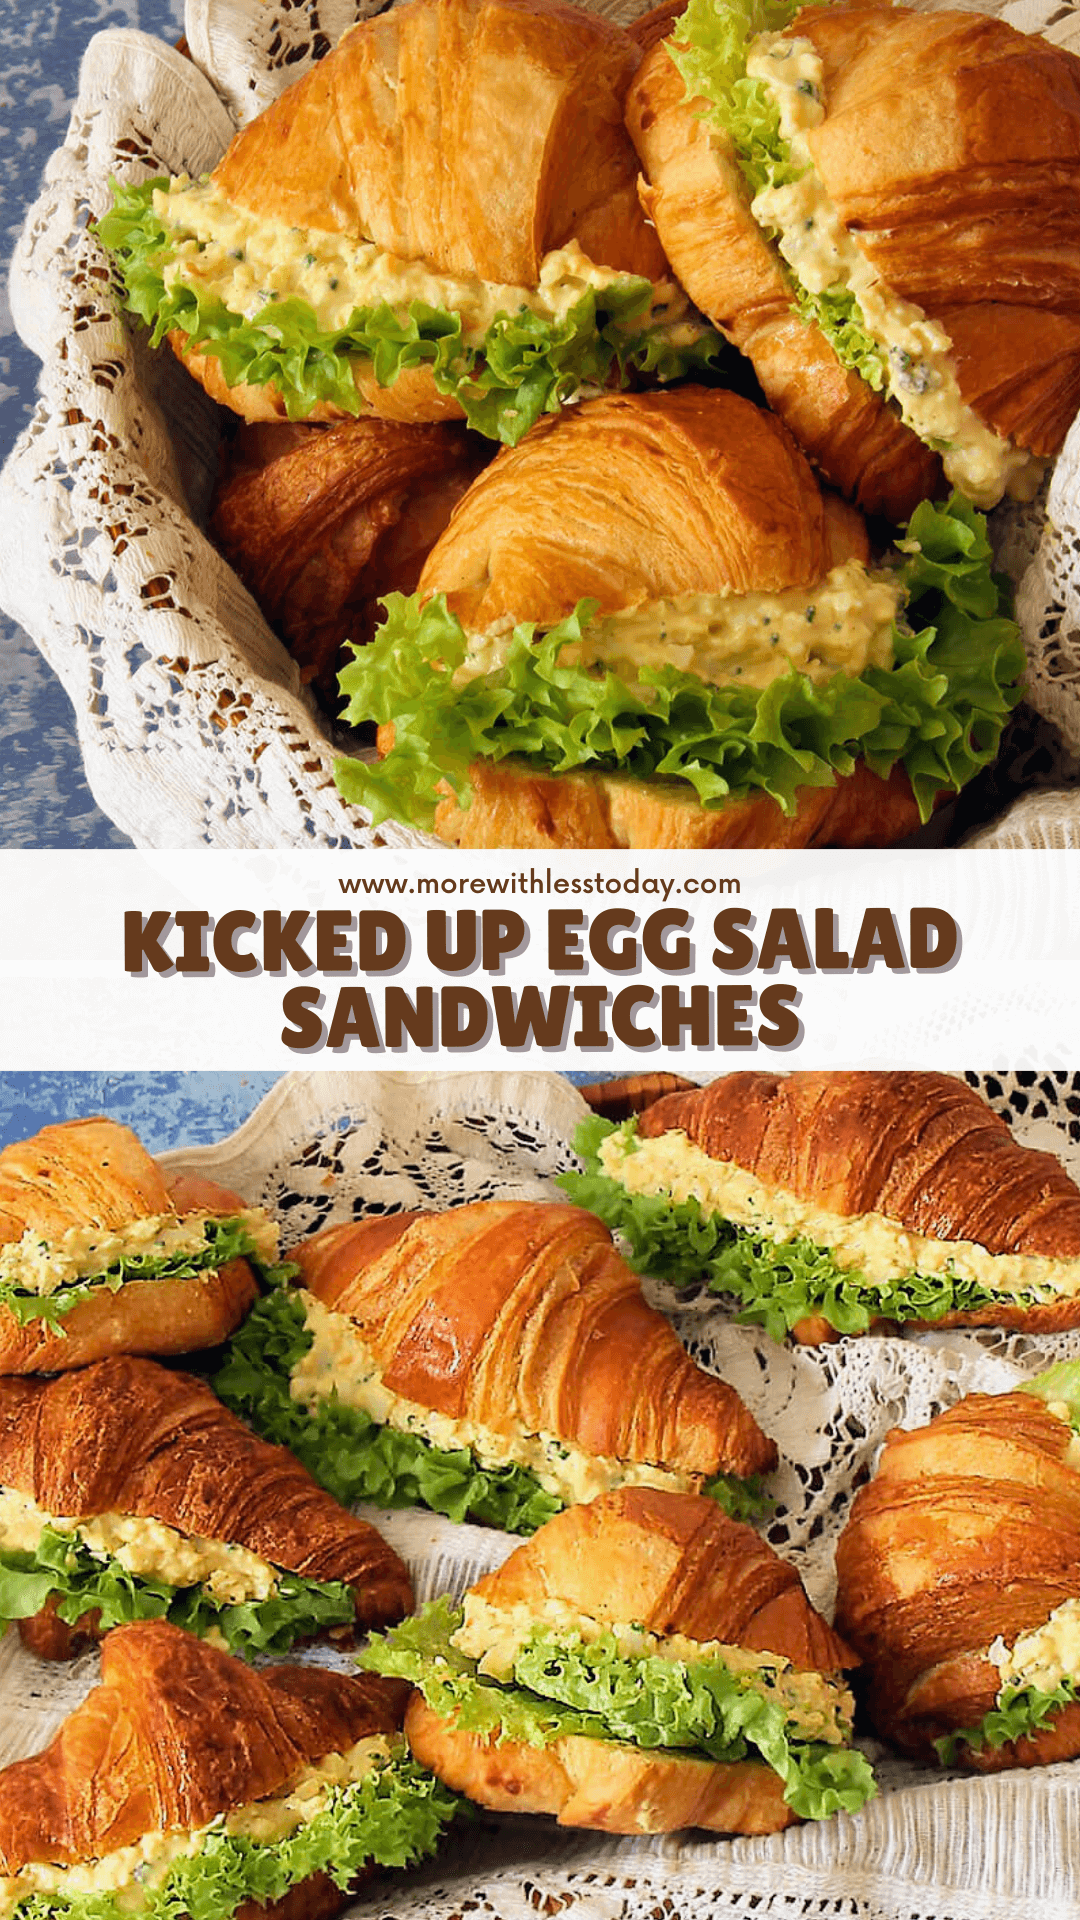 Kicked Up Egg Salad Sandwiches - PIN